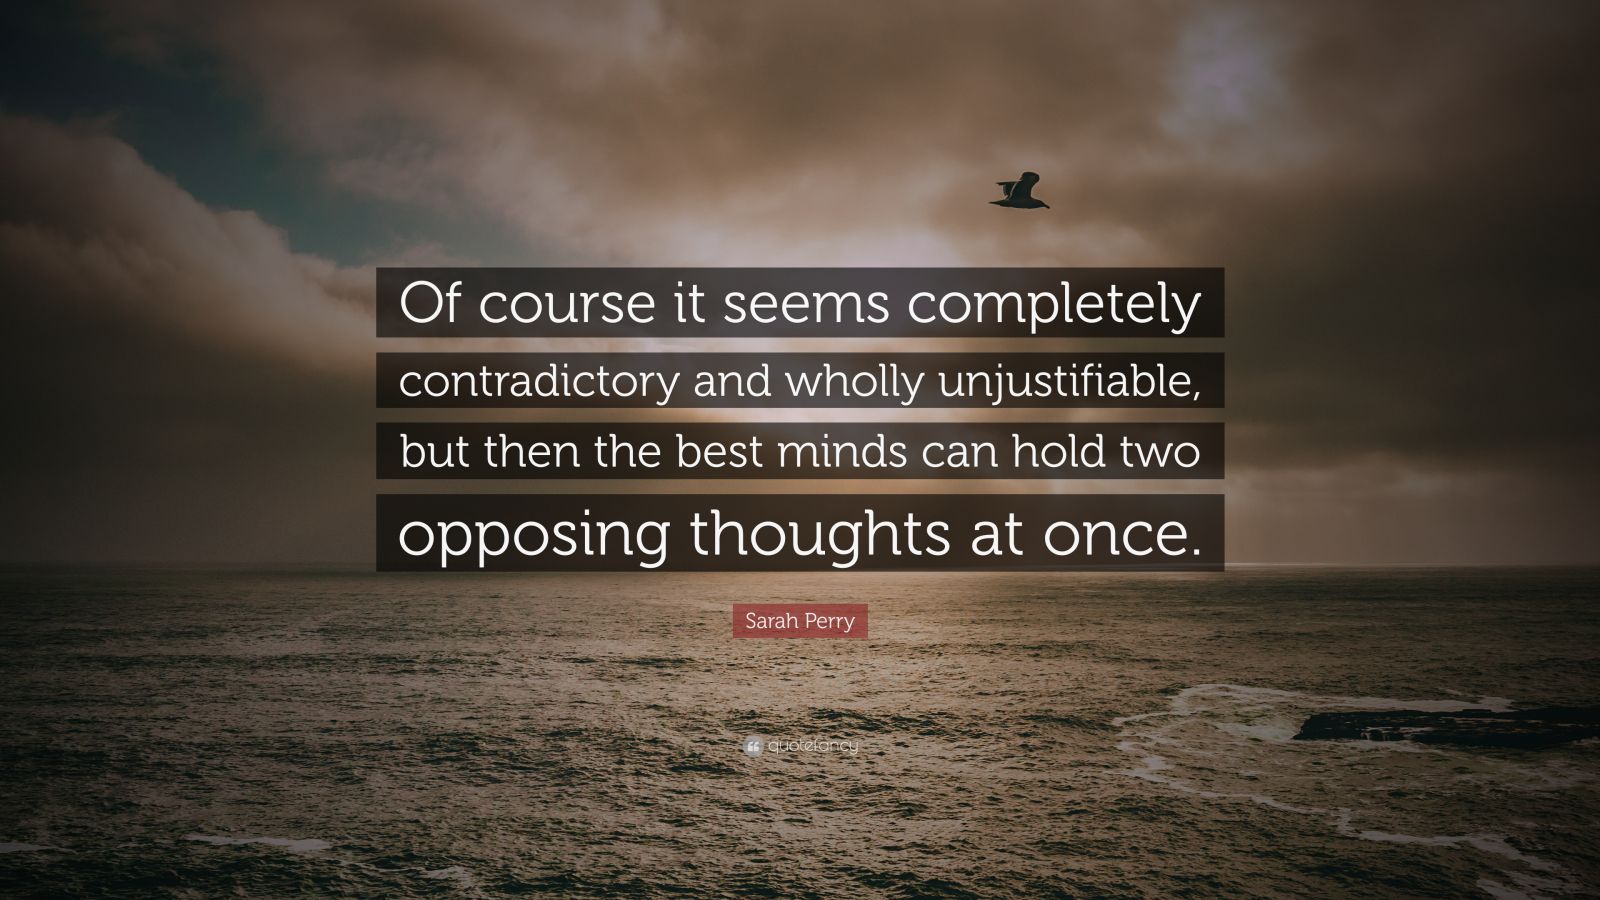 Sarah Perry Quote: “Of course it seems completely contradictory and wholly  unjustifiable, but then the best minds can hold two opposing thou...”